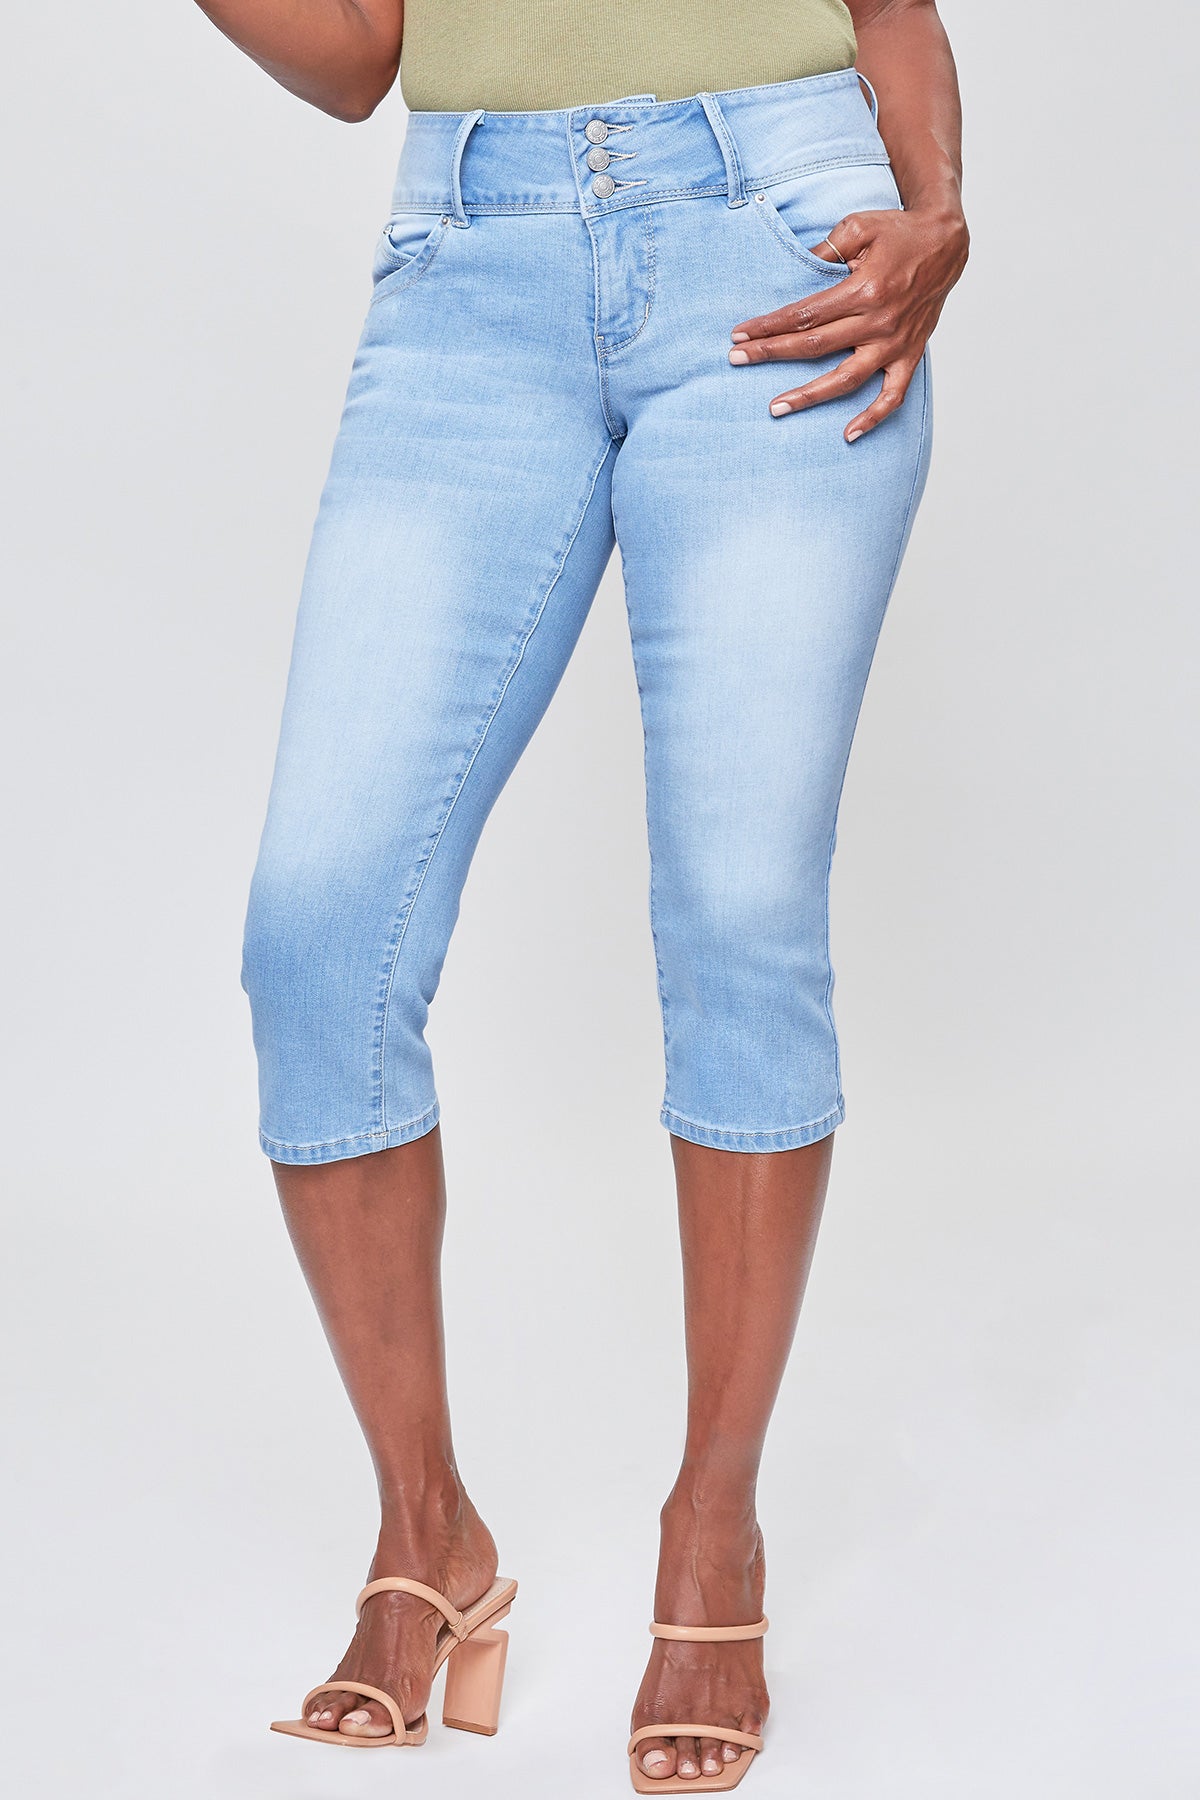 Missy Wannabettabutt 3-Button Capri Made With Recycled Fibers 12 Pack